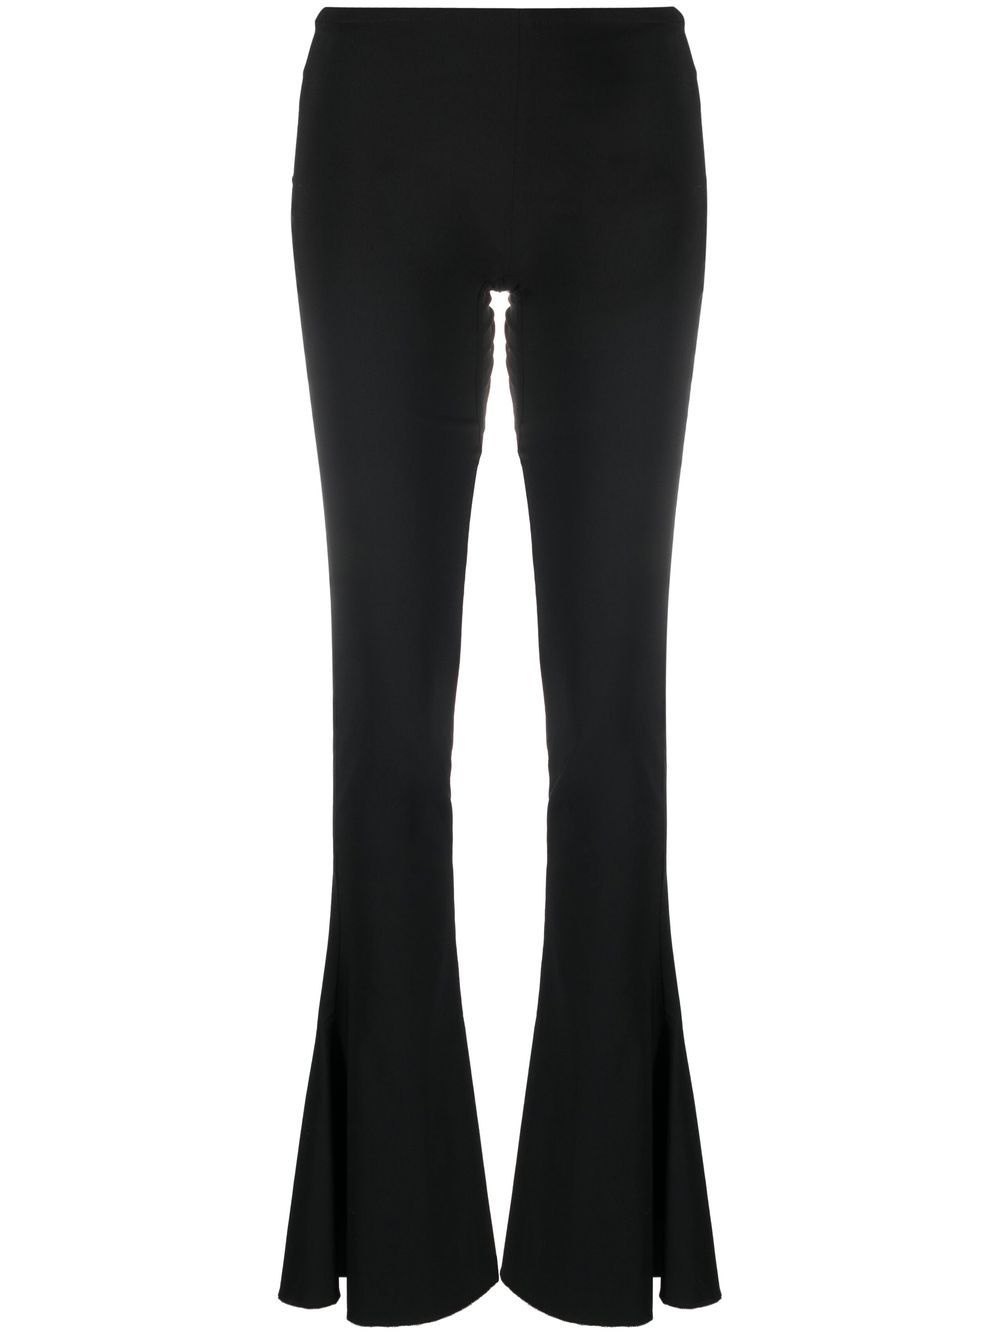 Drd flared trousers - 1